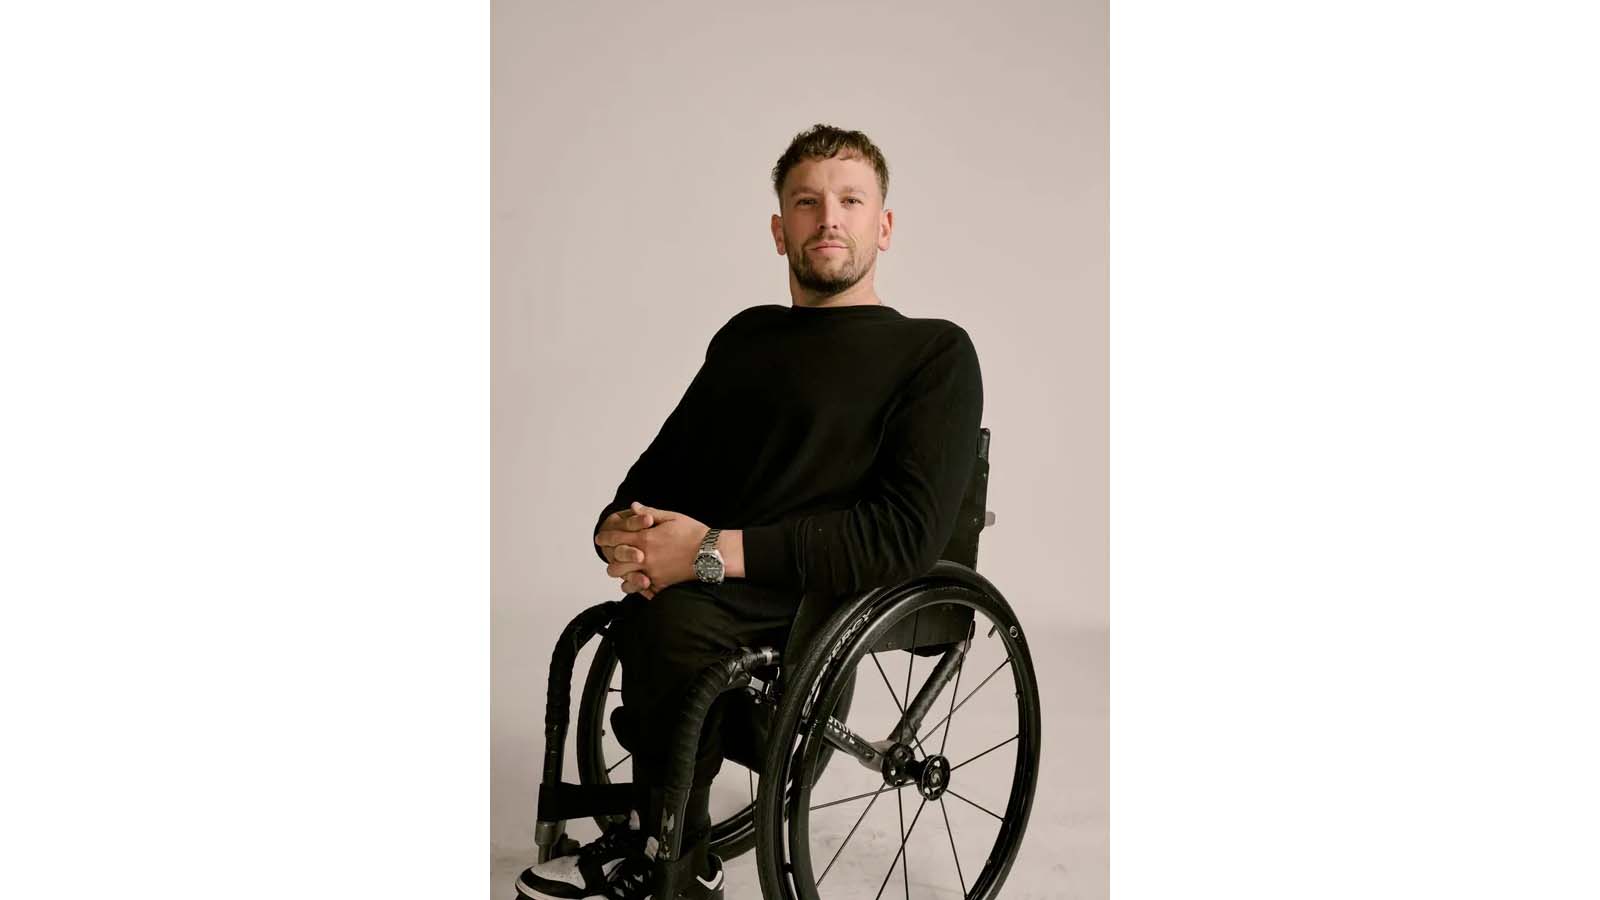 A man is sitting in a wheelchair against a cream coloured backdrop. He is wearing a black jumper and black pants with his hands clasped in his lap.